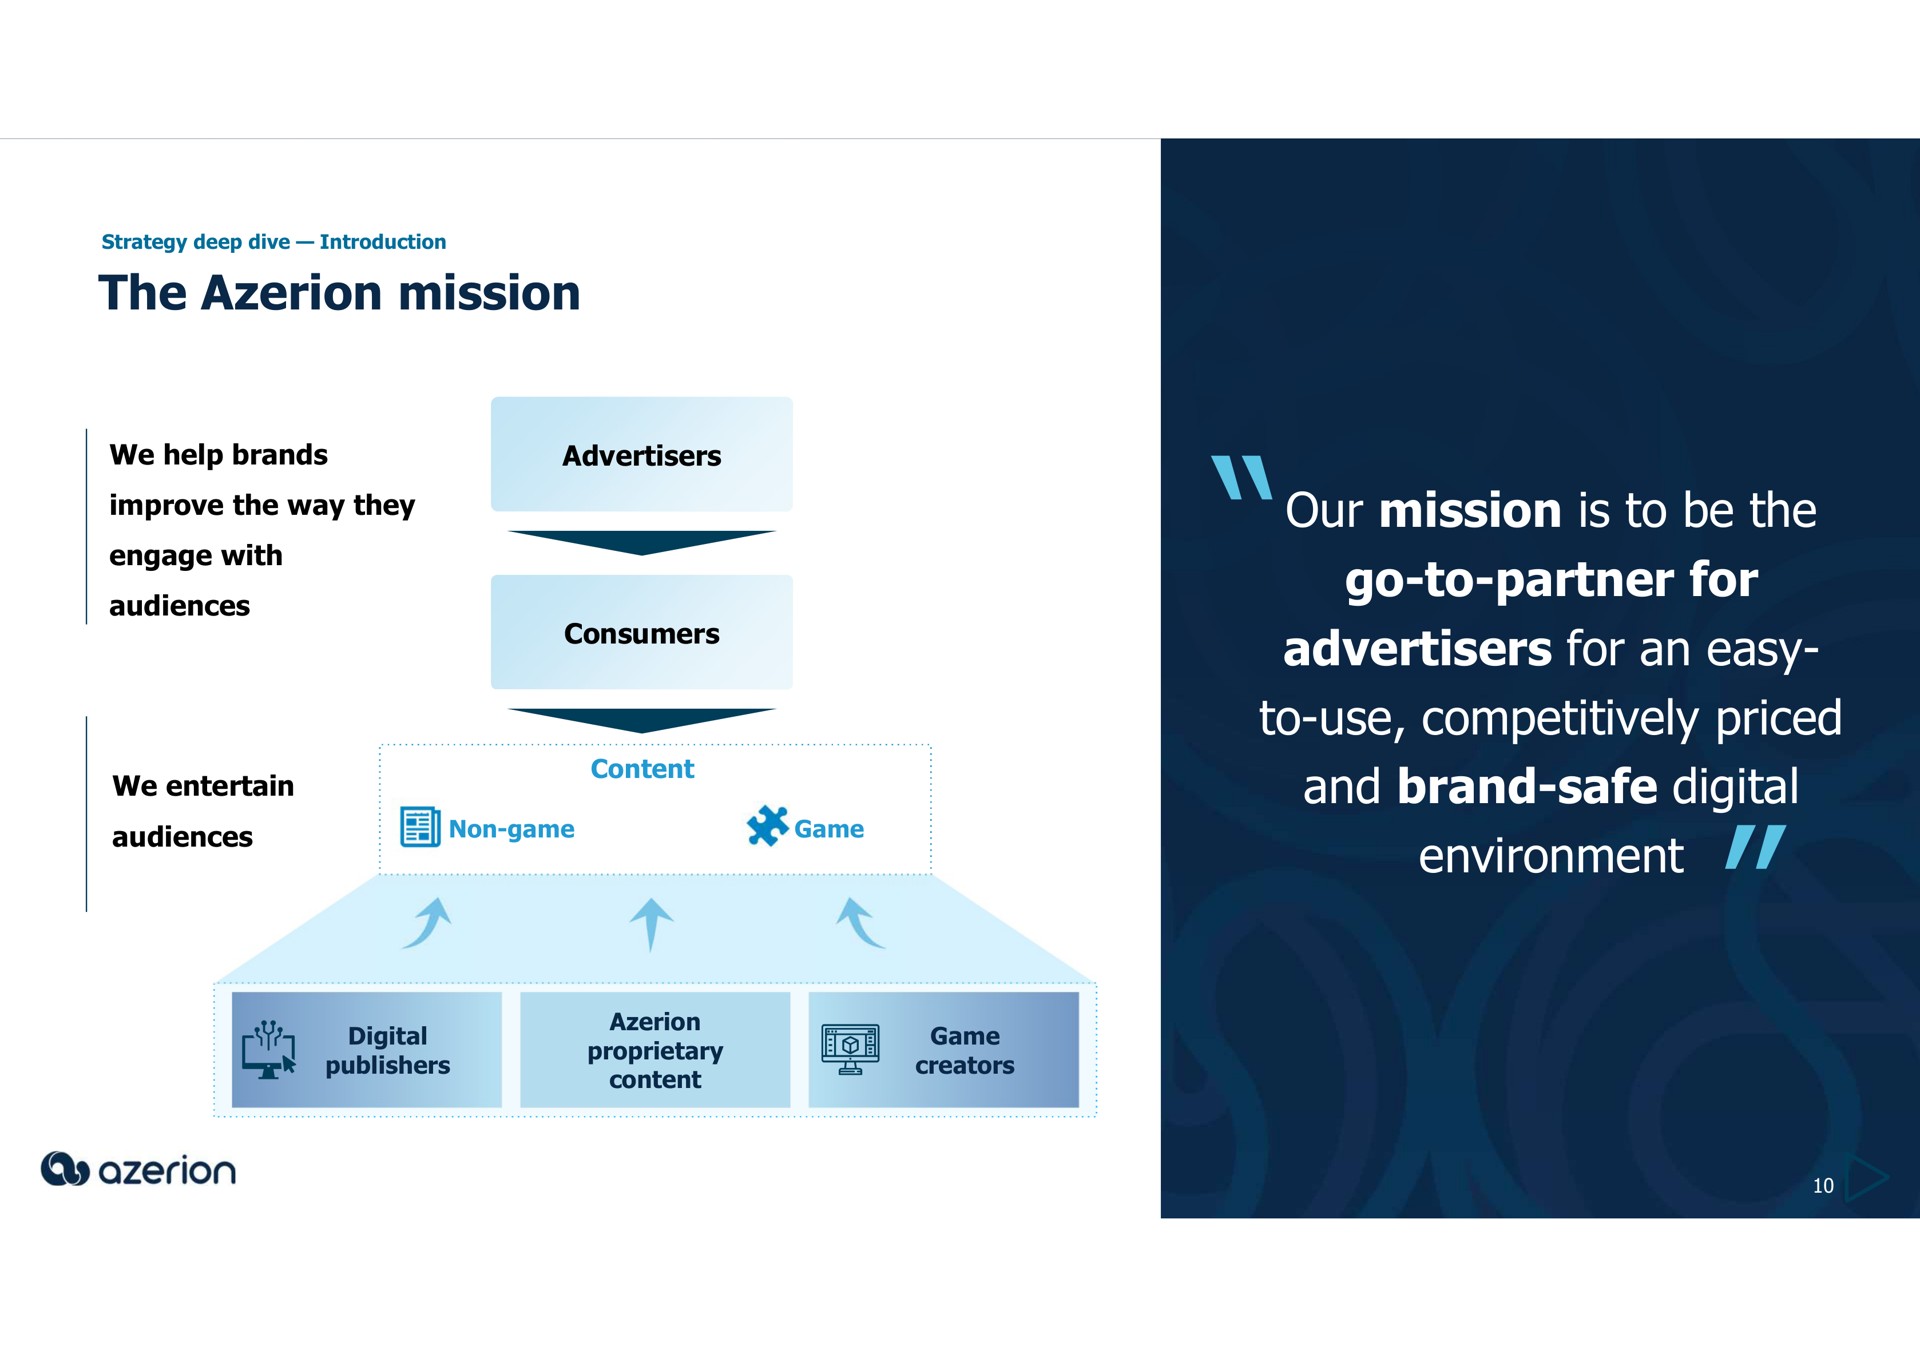 the mission our mission is to be the go to partner for advertisers for an easy to use competitively priced and brand safe digital environment improve way they engage civic a content we entertain audiences proprietary puns creators | Azerion